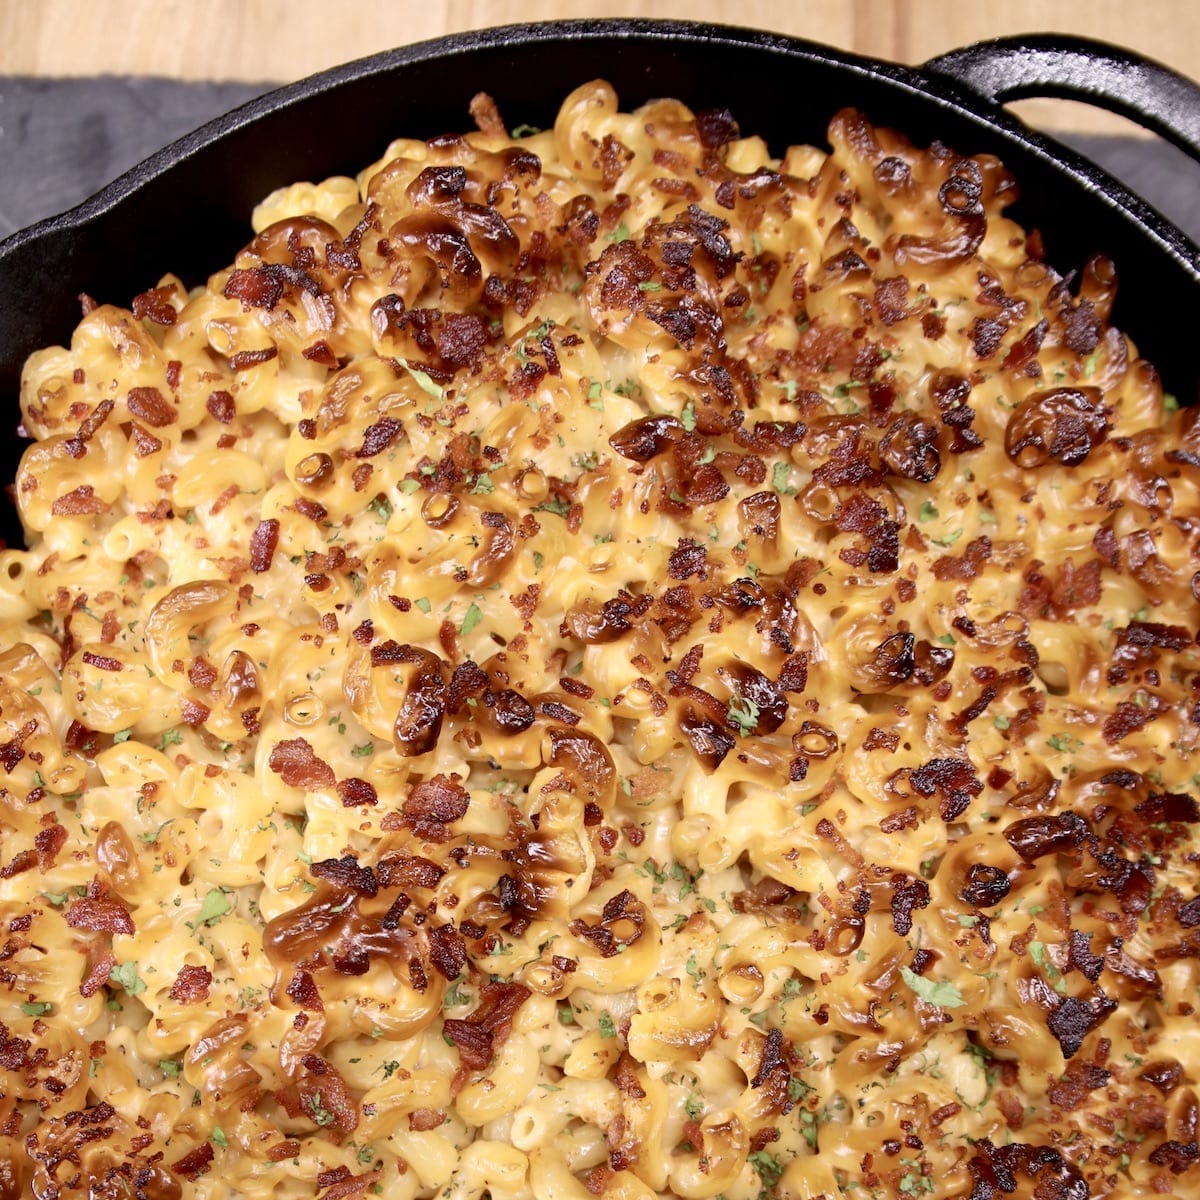 Smoked Mac and cheese in a cast iron skillet